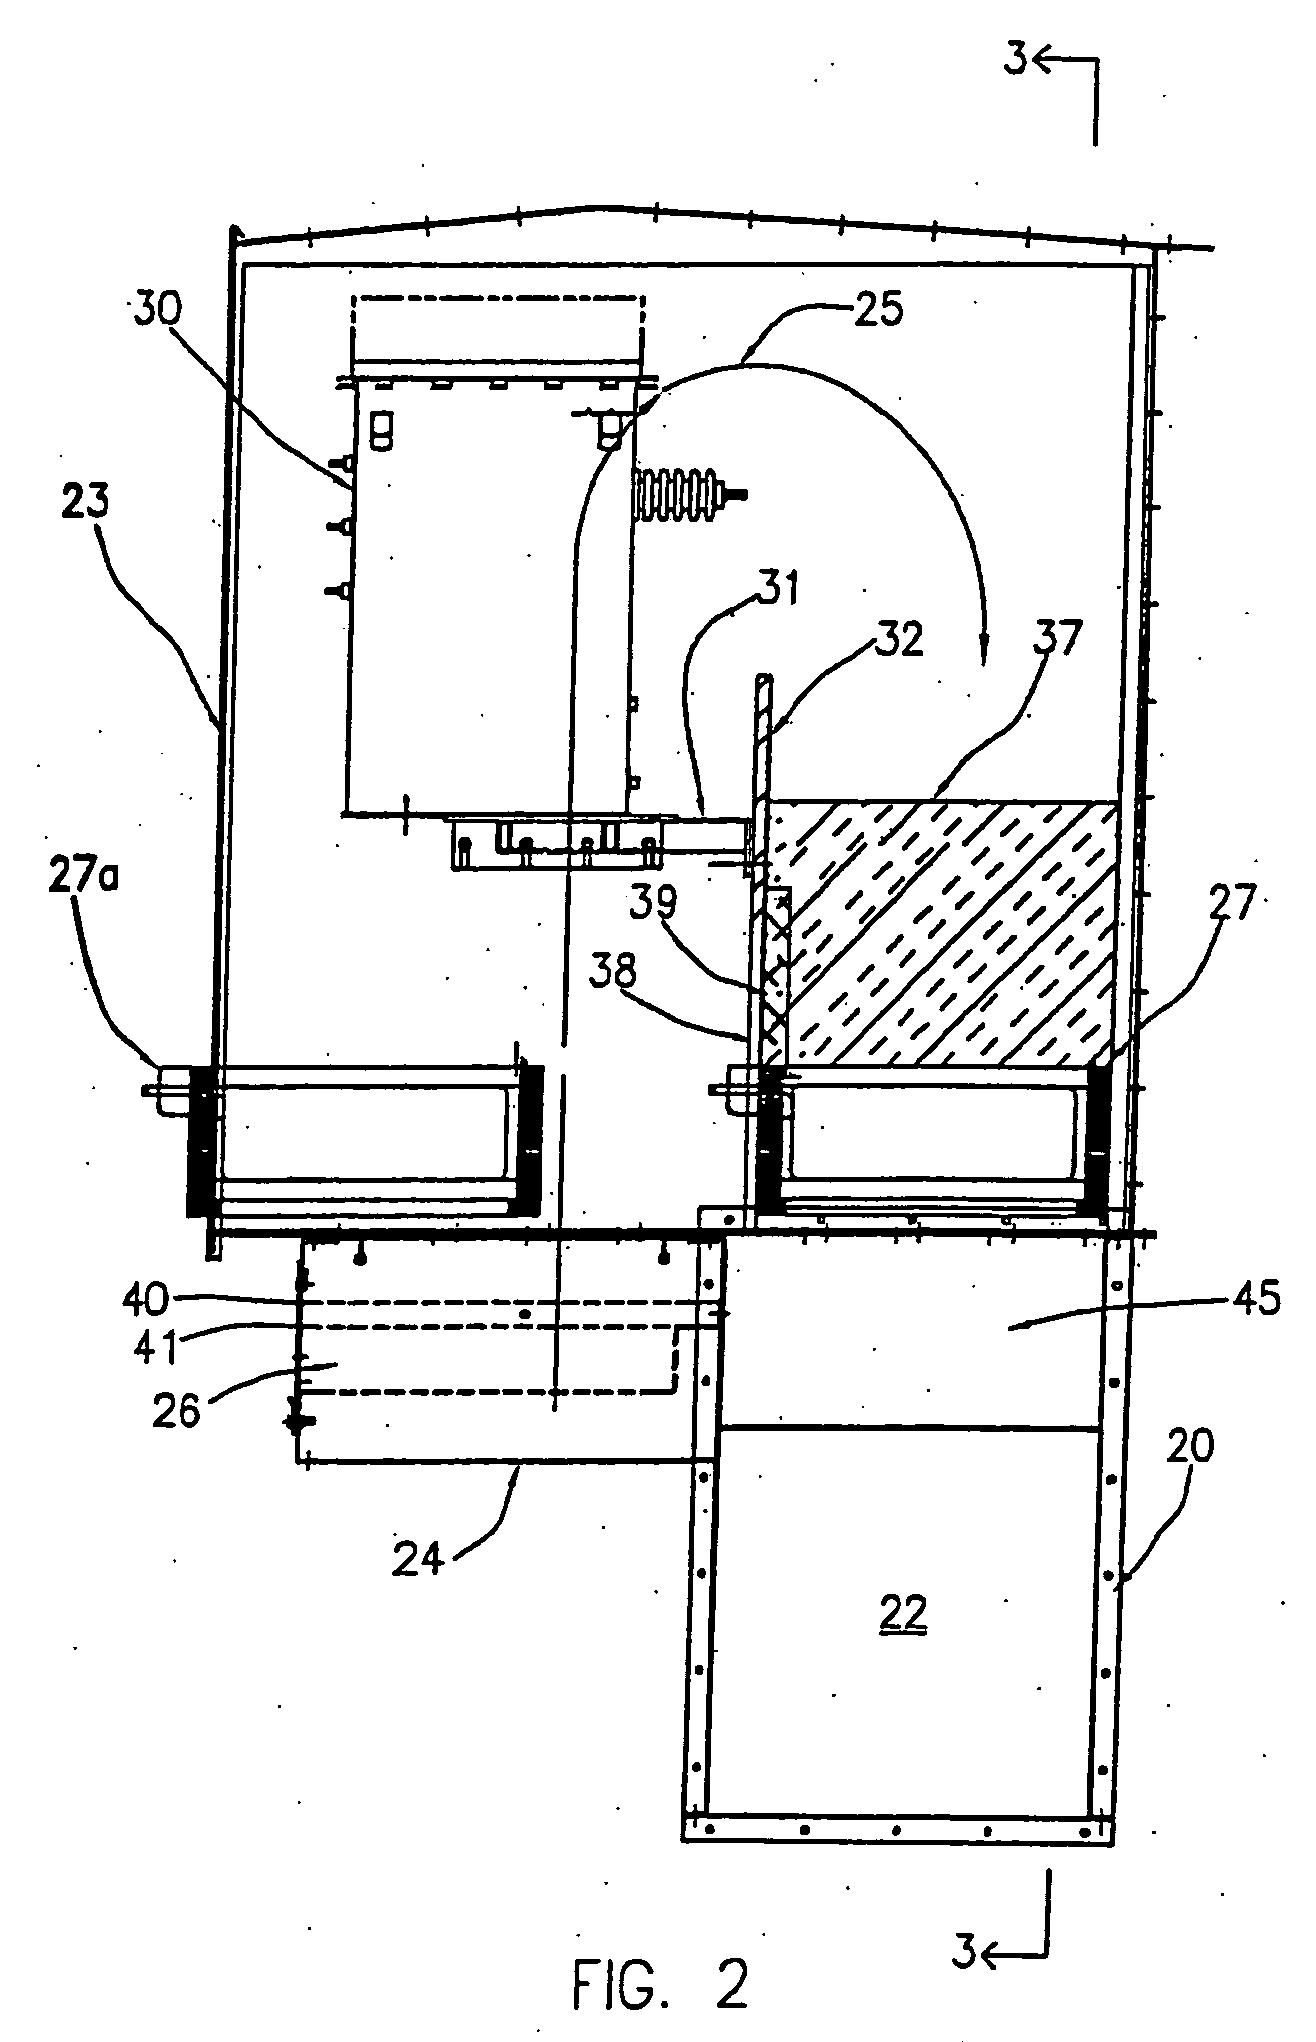 Dielectric barrier discharge cell with hermetically sealed electrodes, apparatus and method for the treatment of odor and volatile organic compound contaminants in air emissions, and for purifying gases and sterilizing surfaces